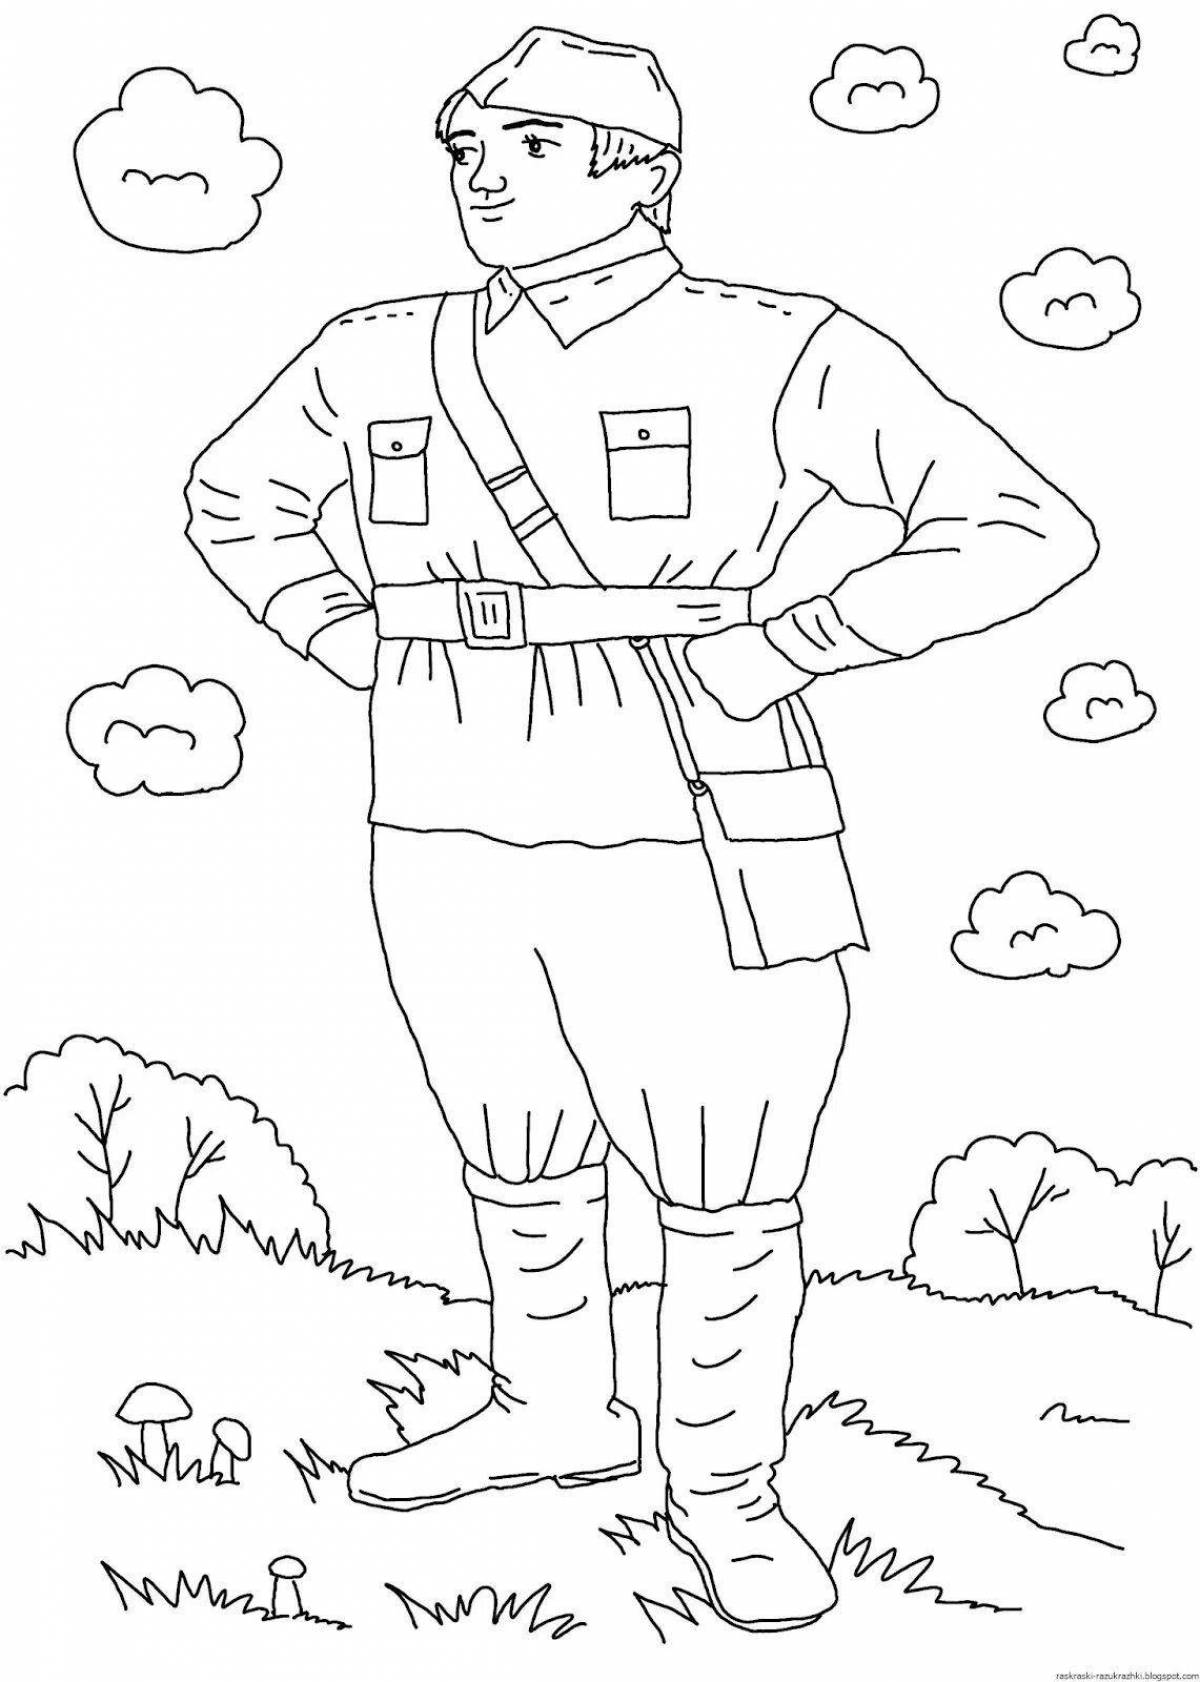 Playful military coloring book for 5-6 year olds